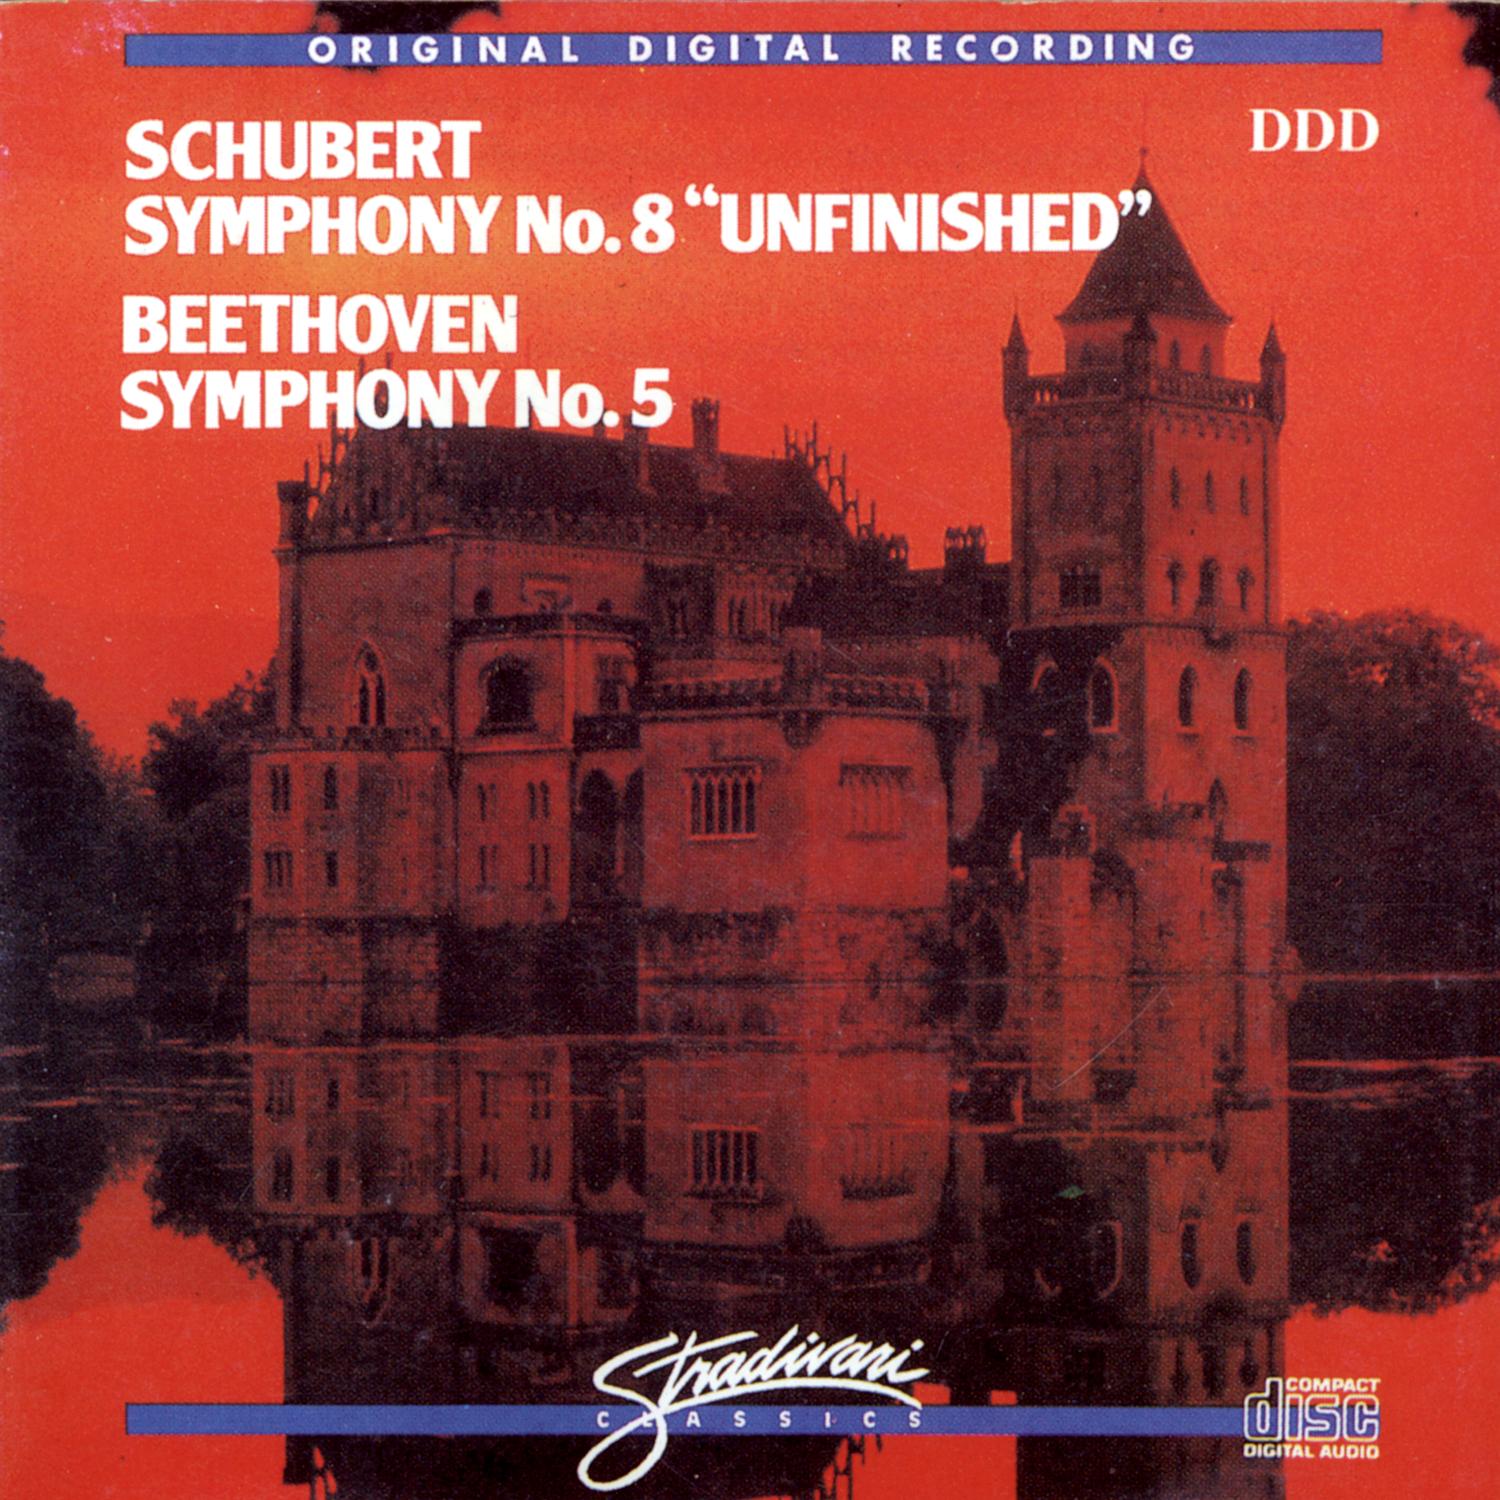 Symphony No 8 In B Minor, D 759 "Unfinished"- Allegro Moderato